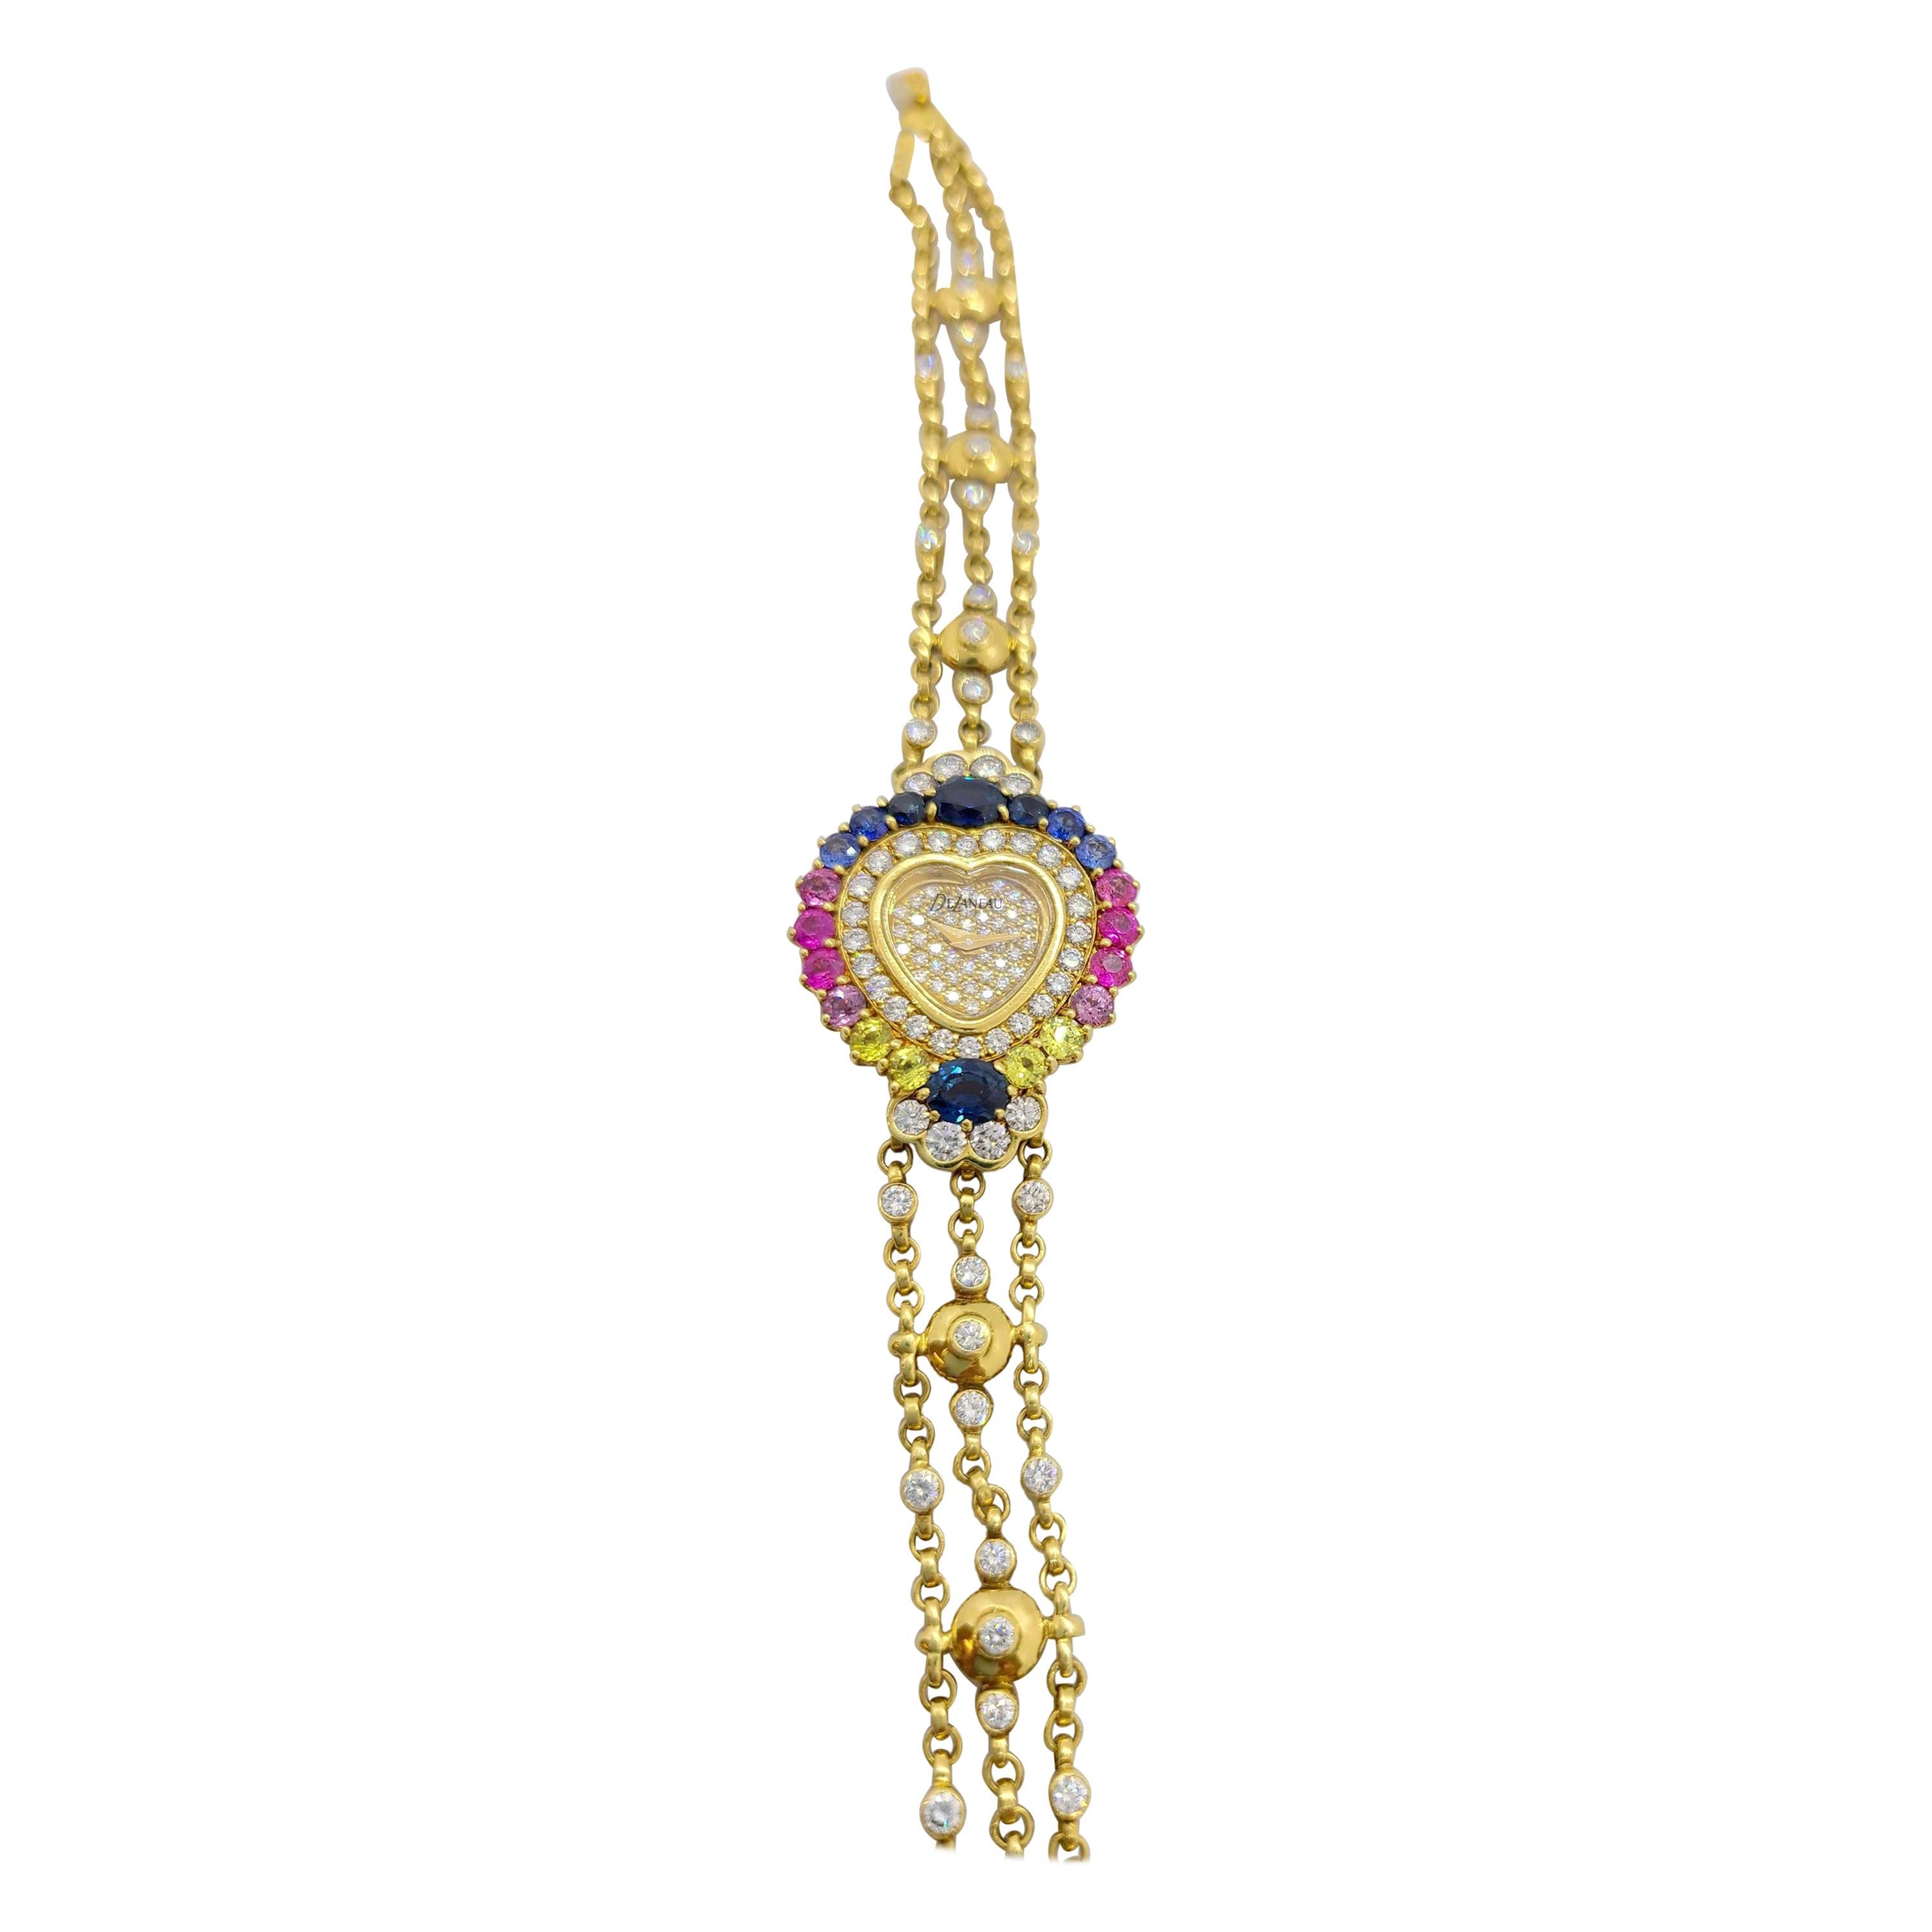 DeLaneau 18 Karat Gold Diamond and Multicolored Sapphires Heart Shaped Watch